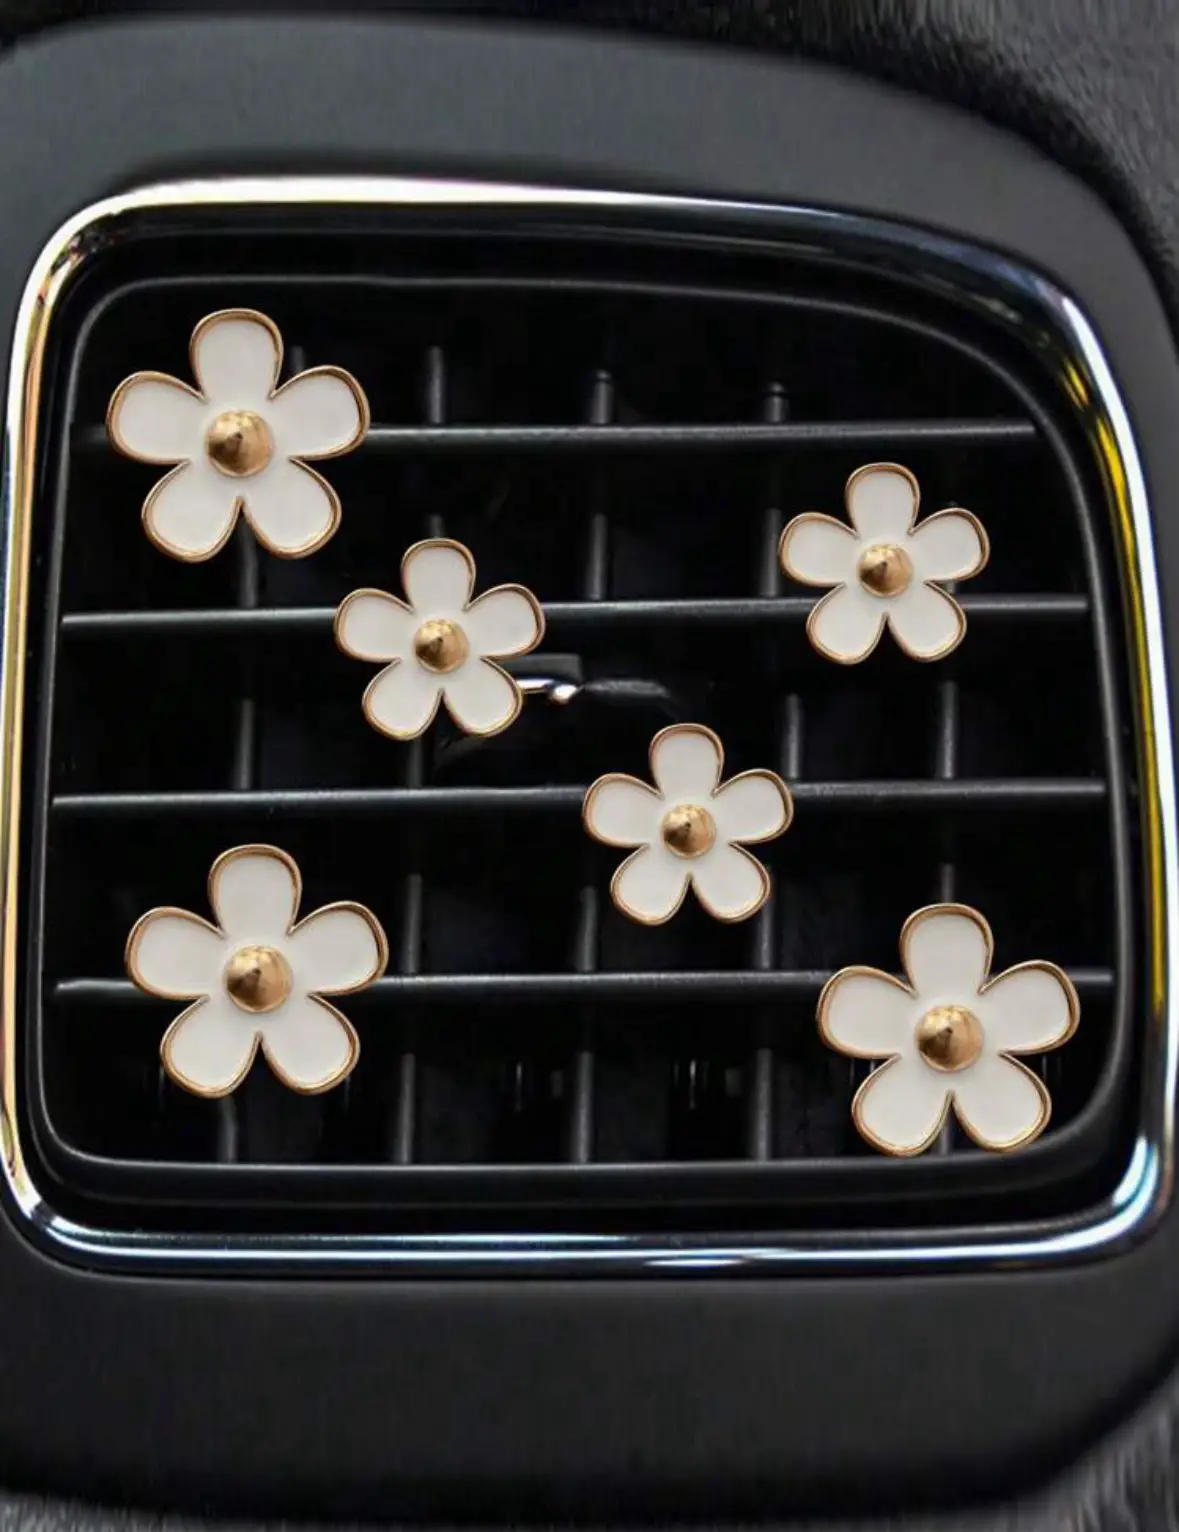 car accessories for honeycomb vents - Lemon8 Search